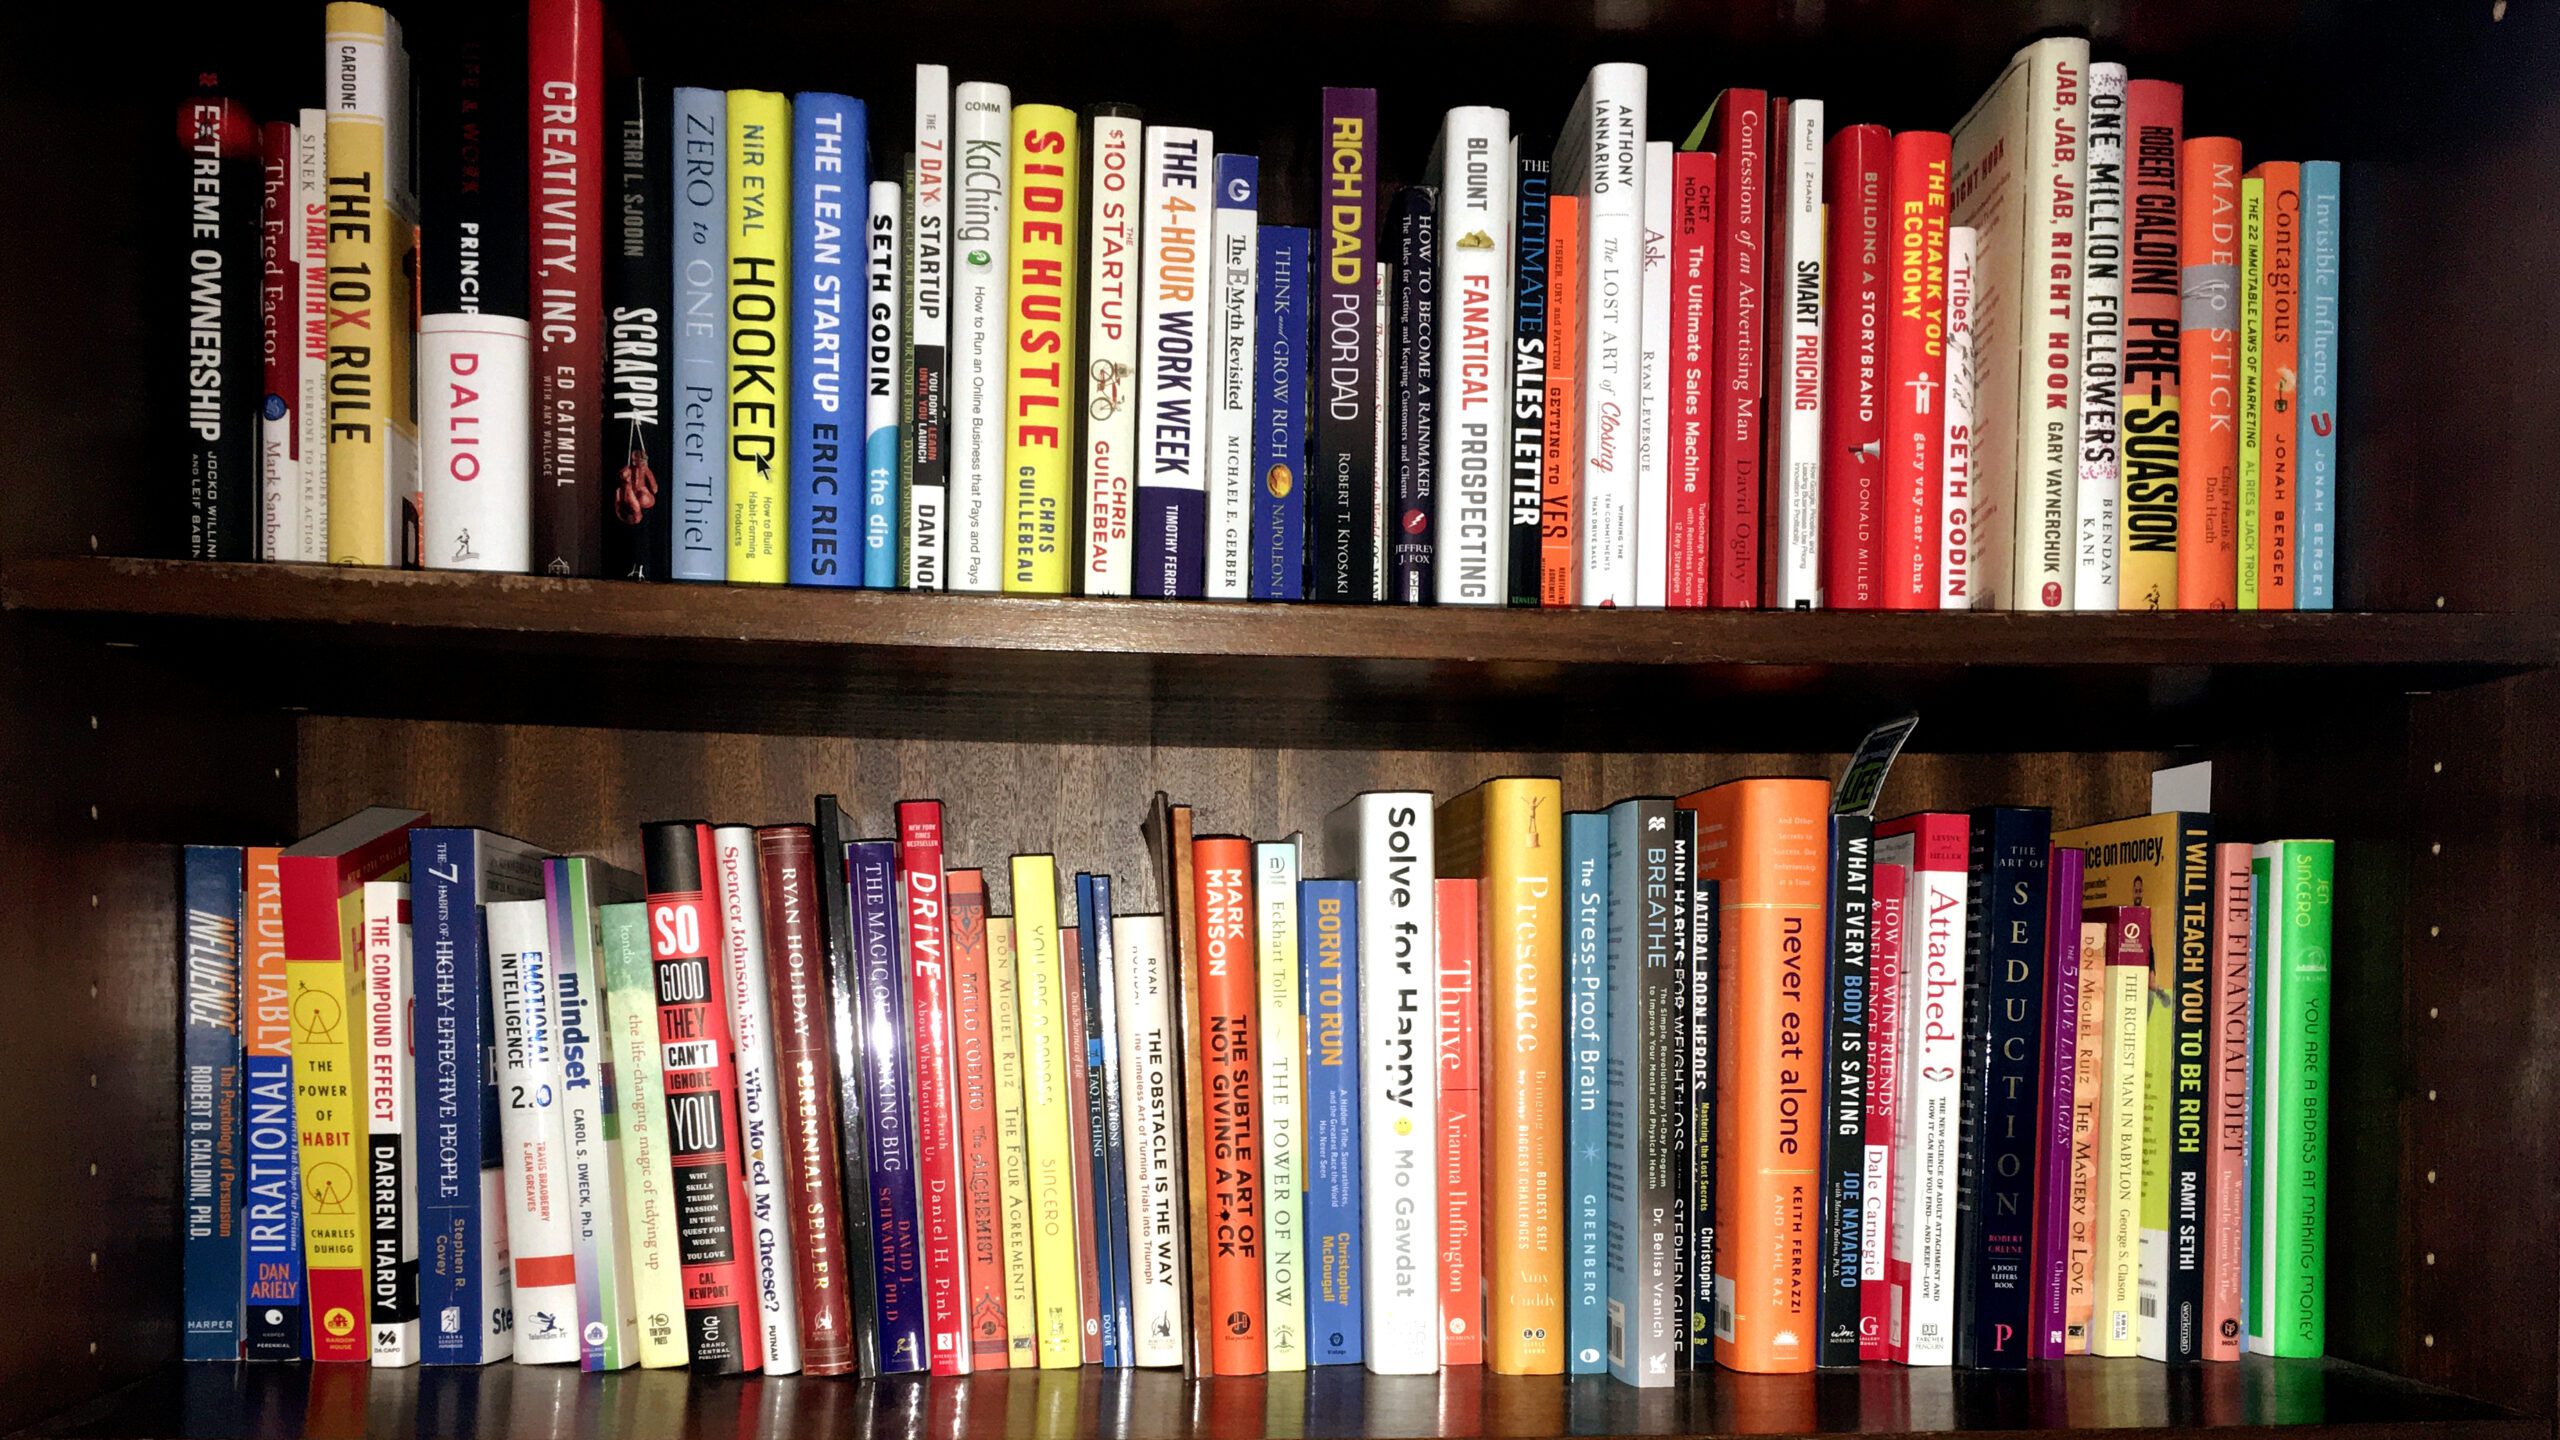 My Top Marketing Book Recommendations